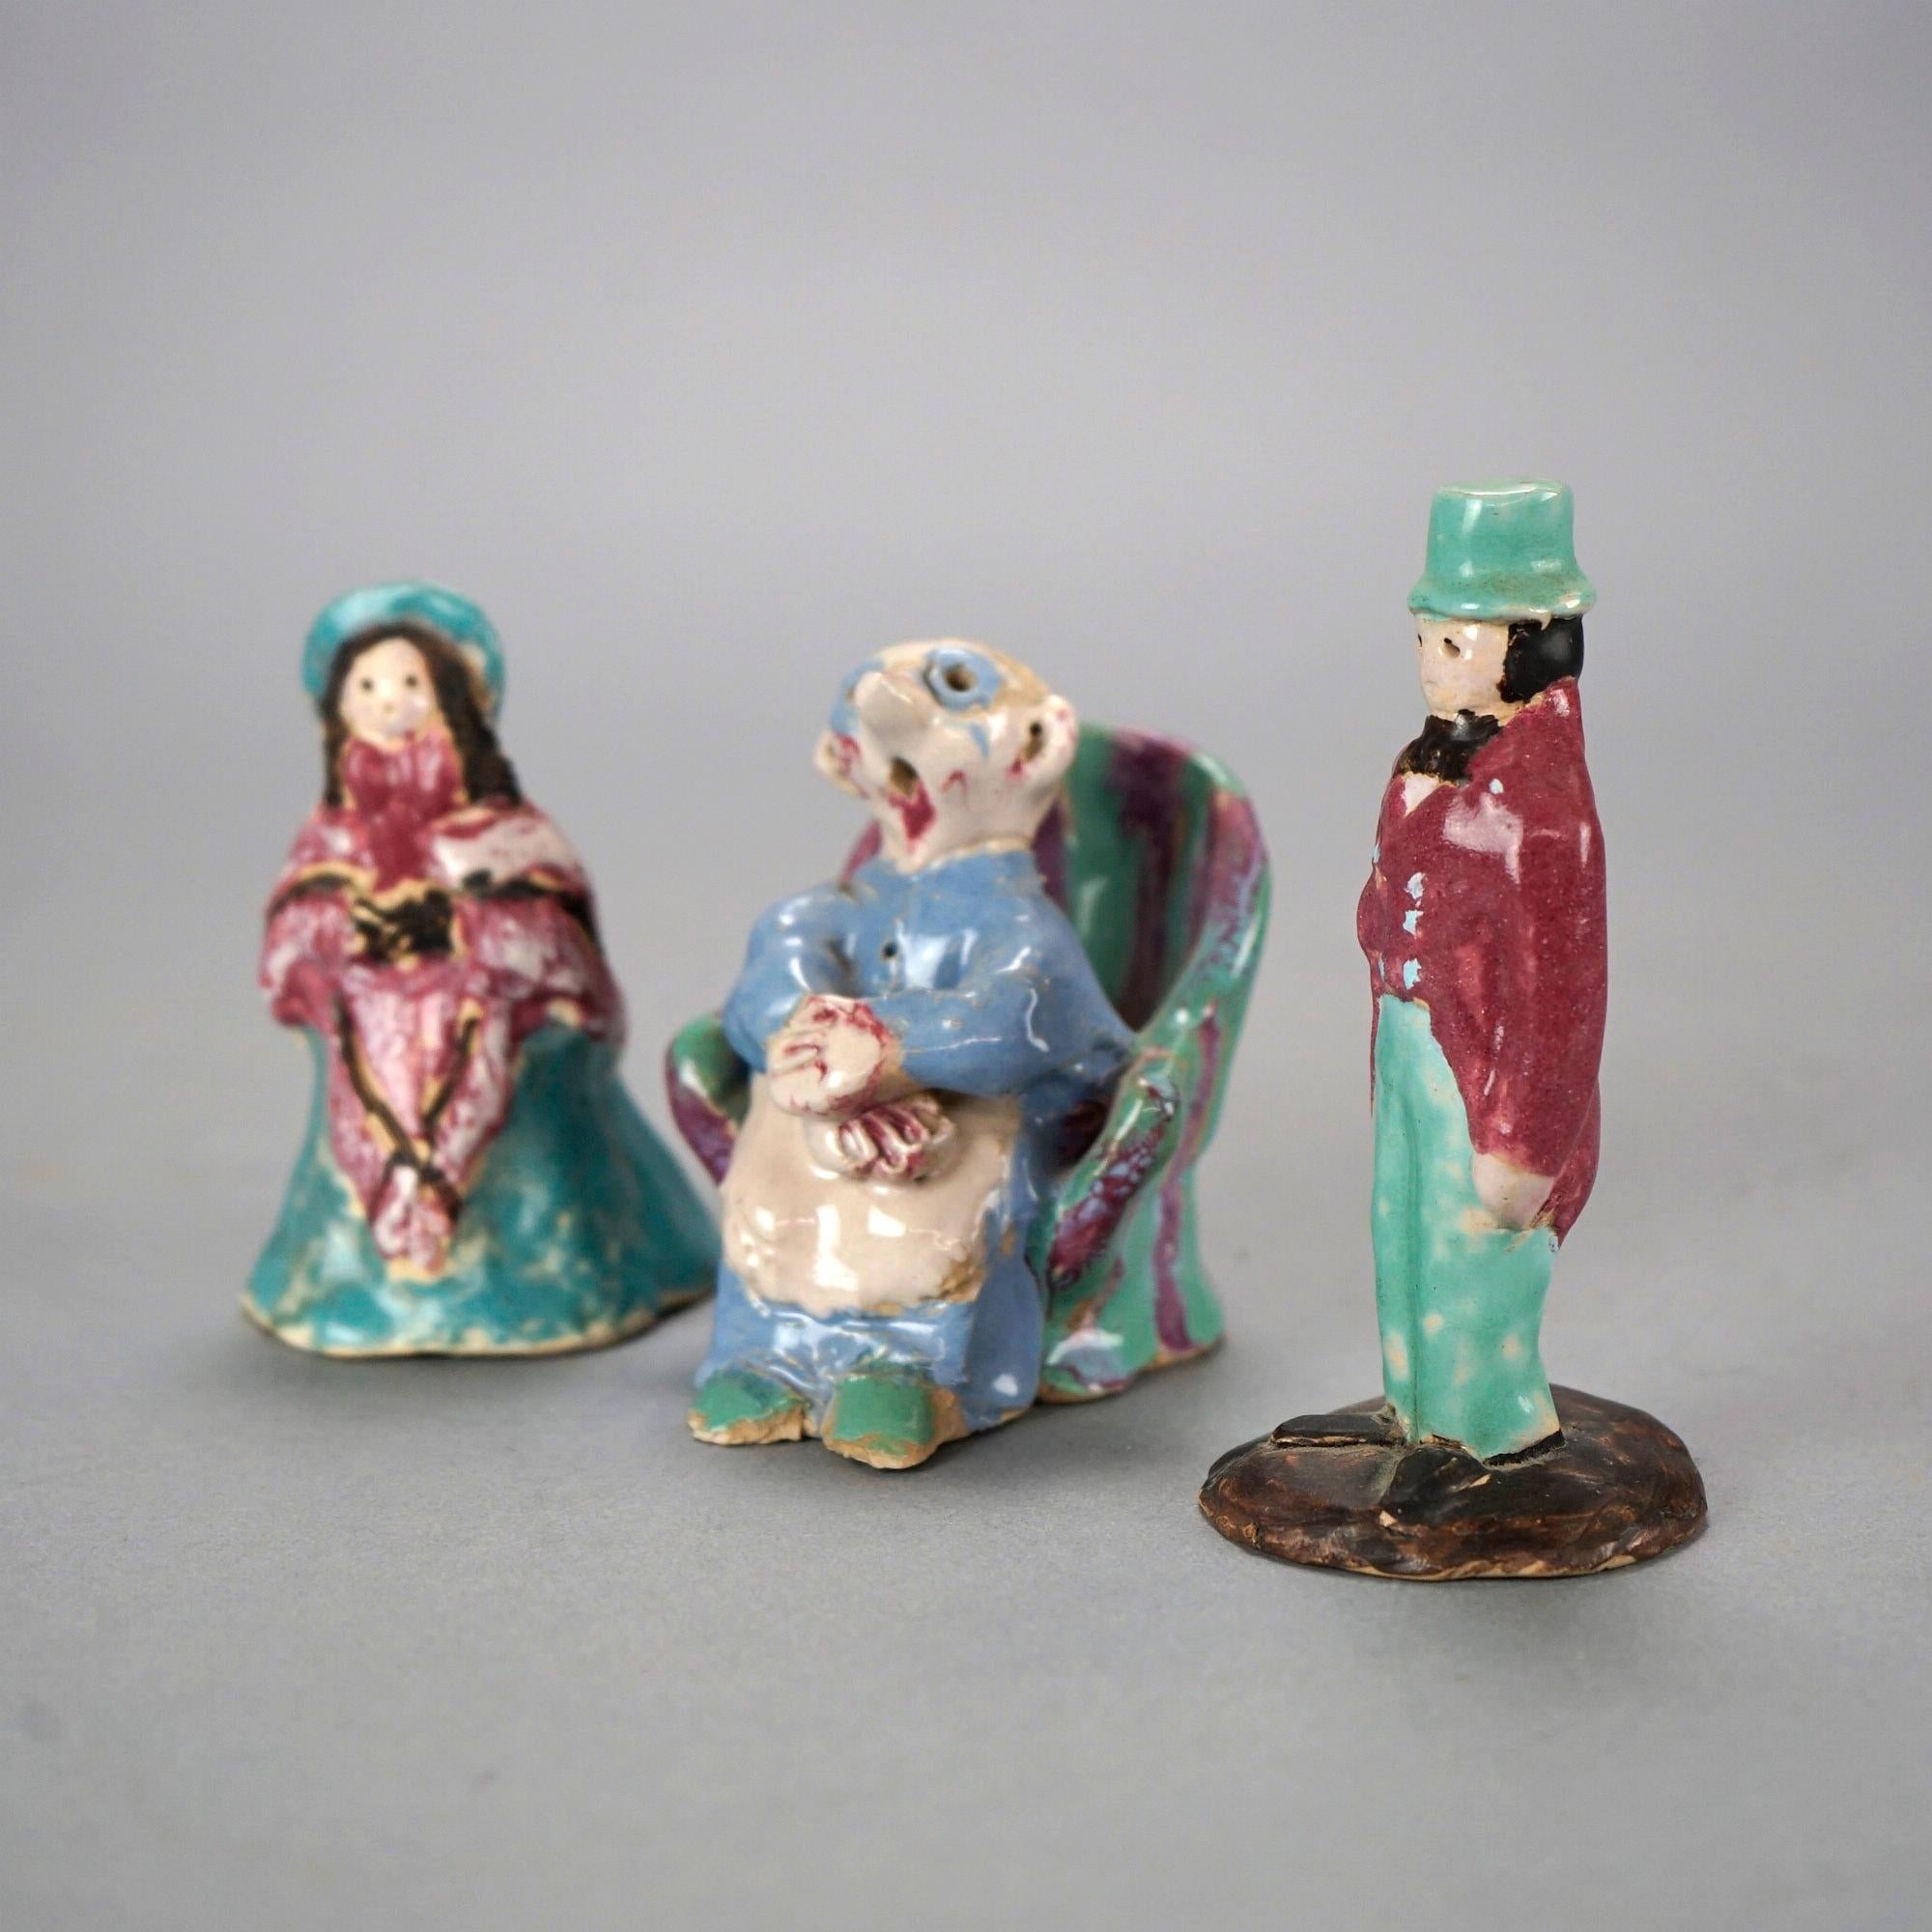 A set of three figurines by Overbeck offer art pottery construction and depict a man in a top hat, a seated woman and a standing woman in a Victorian dress, maker mark as photographed, c1920.

Measures- Seated woman 3.25'' H x 3.5'' W x 2.5'' D;